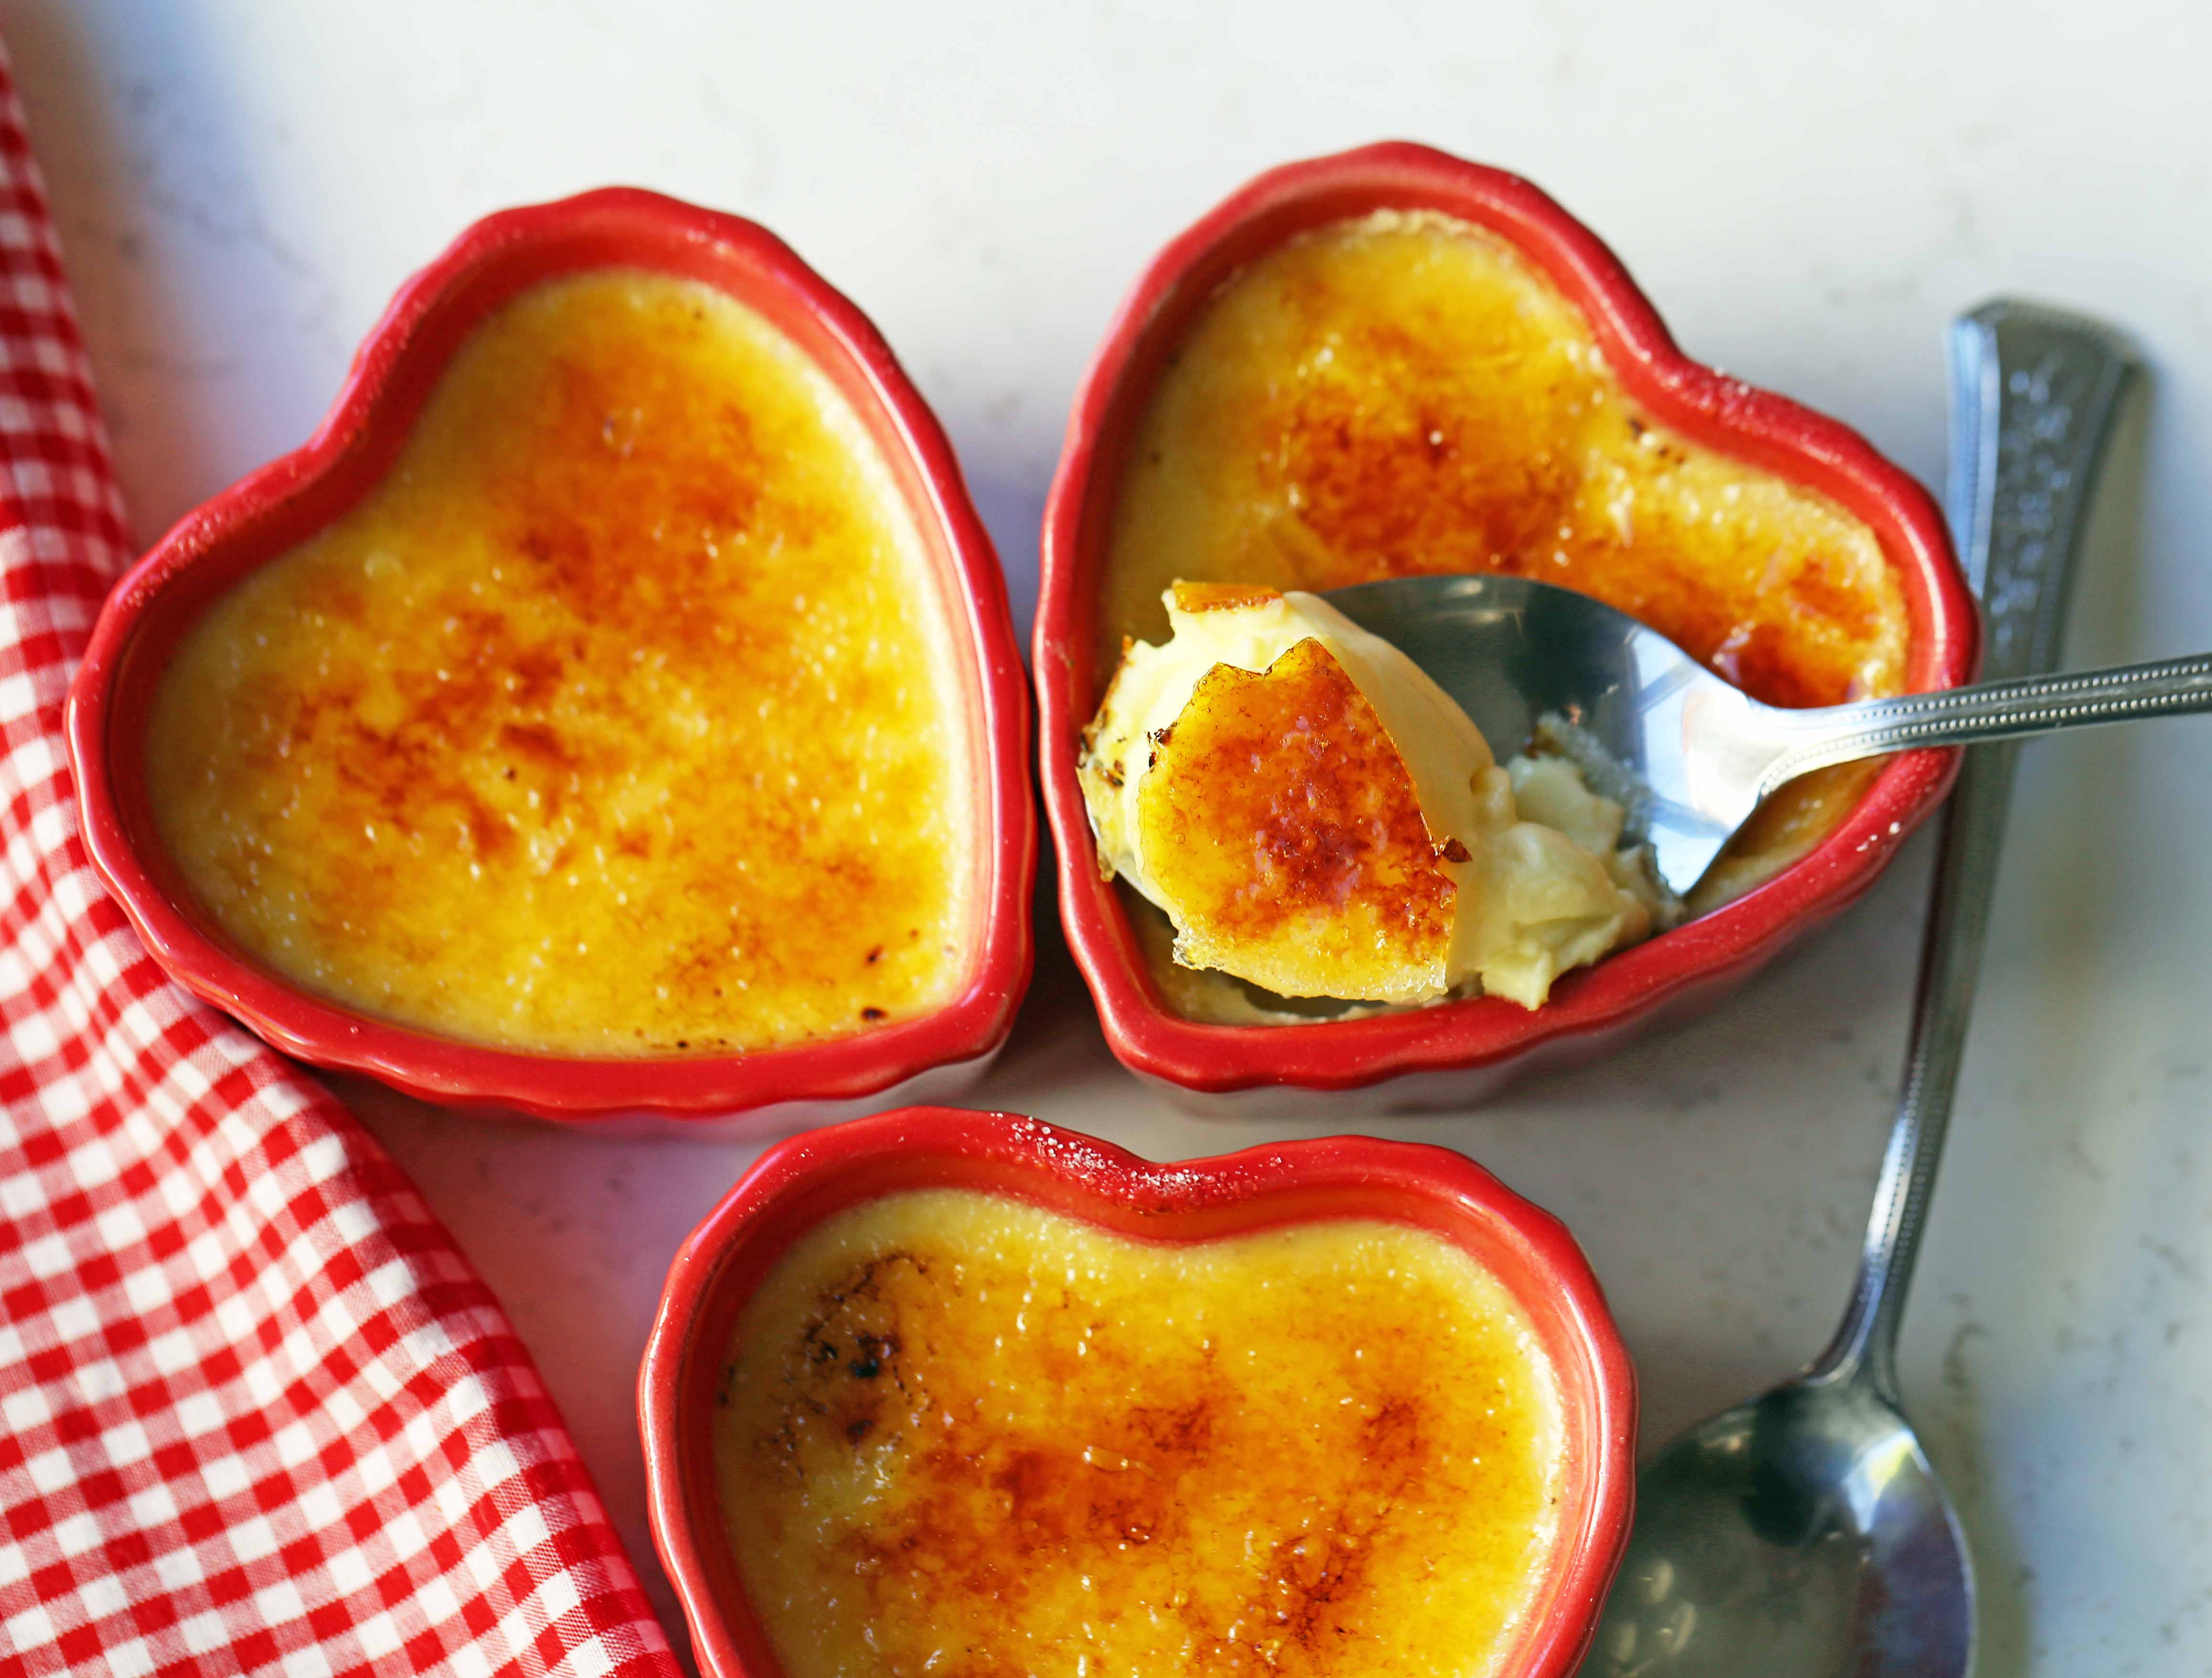 Creme Brulee Recipe. Howto make the best creme brulee. A creamy, silky vanilla custard topped with crisp sugar crust is one of the most popular desserts at restaurants for good reason. www.modernhoney.com #cremebrulee #vanillacremebrulee #dessert #valentinesday #valentinesdaydessert